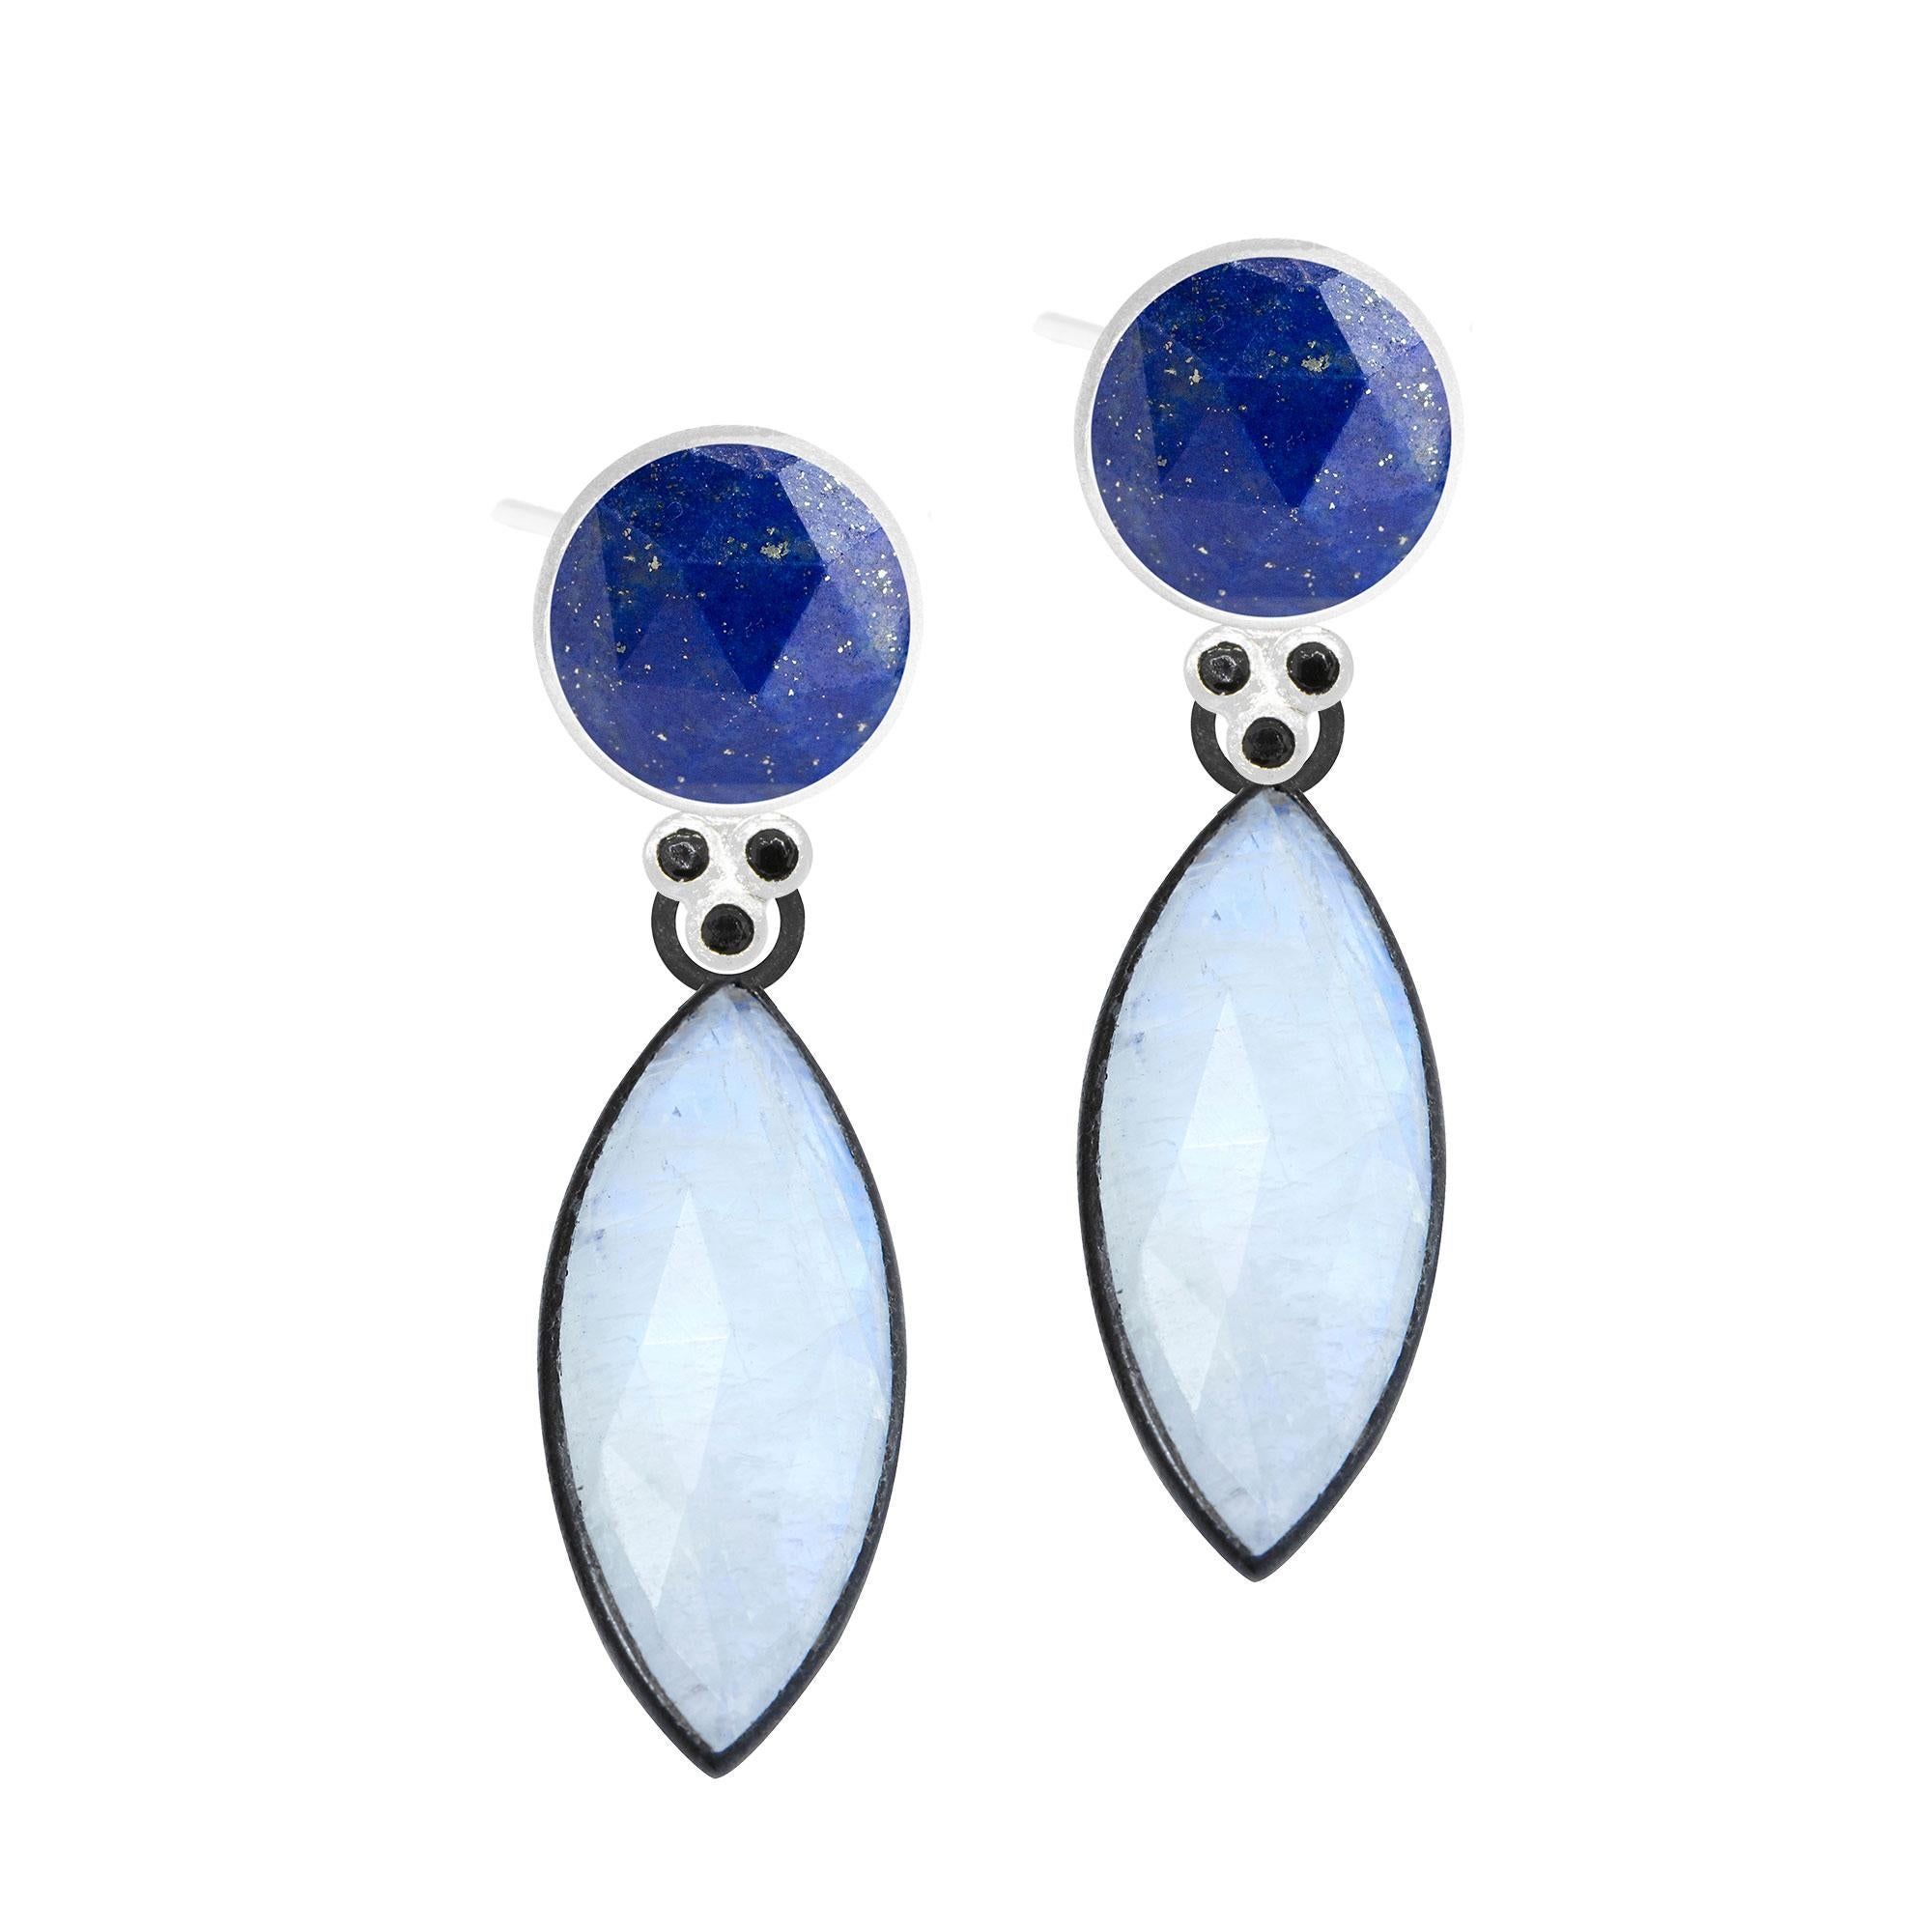 A Nina Nguyen classic: Our Chloe Silver Studs are designed with faceted lapis rimmed in silver, and accented with gemstones for some extra sparkle.

With luminous moonstones in a sleek, on-trend marquise cut, the Mekong Med Oxidized Charms are a